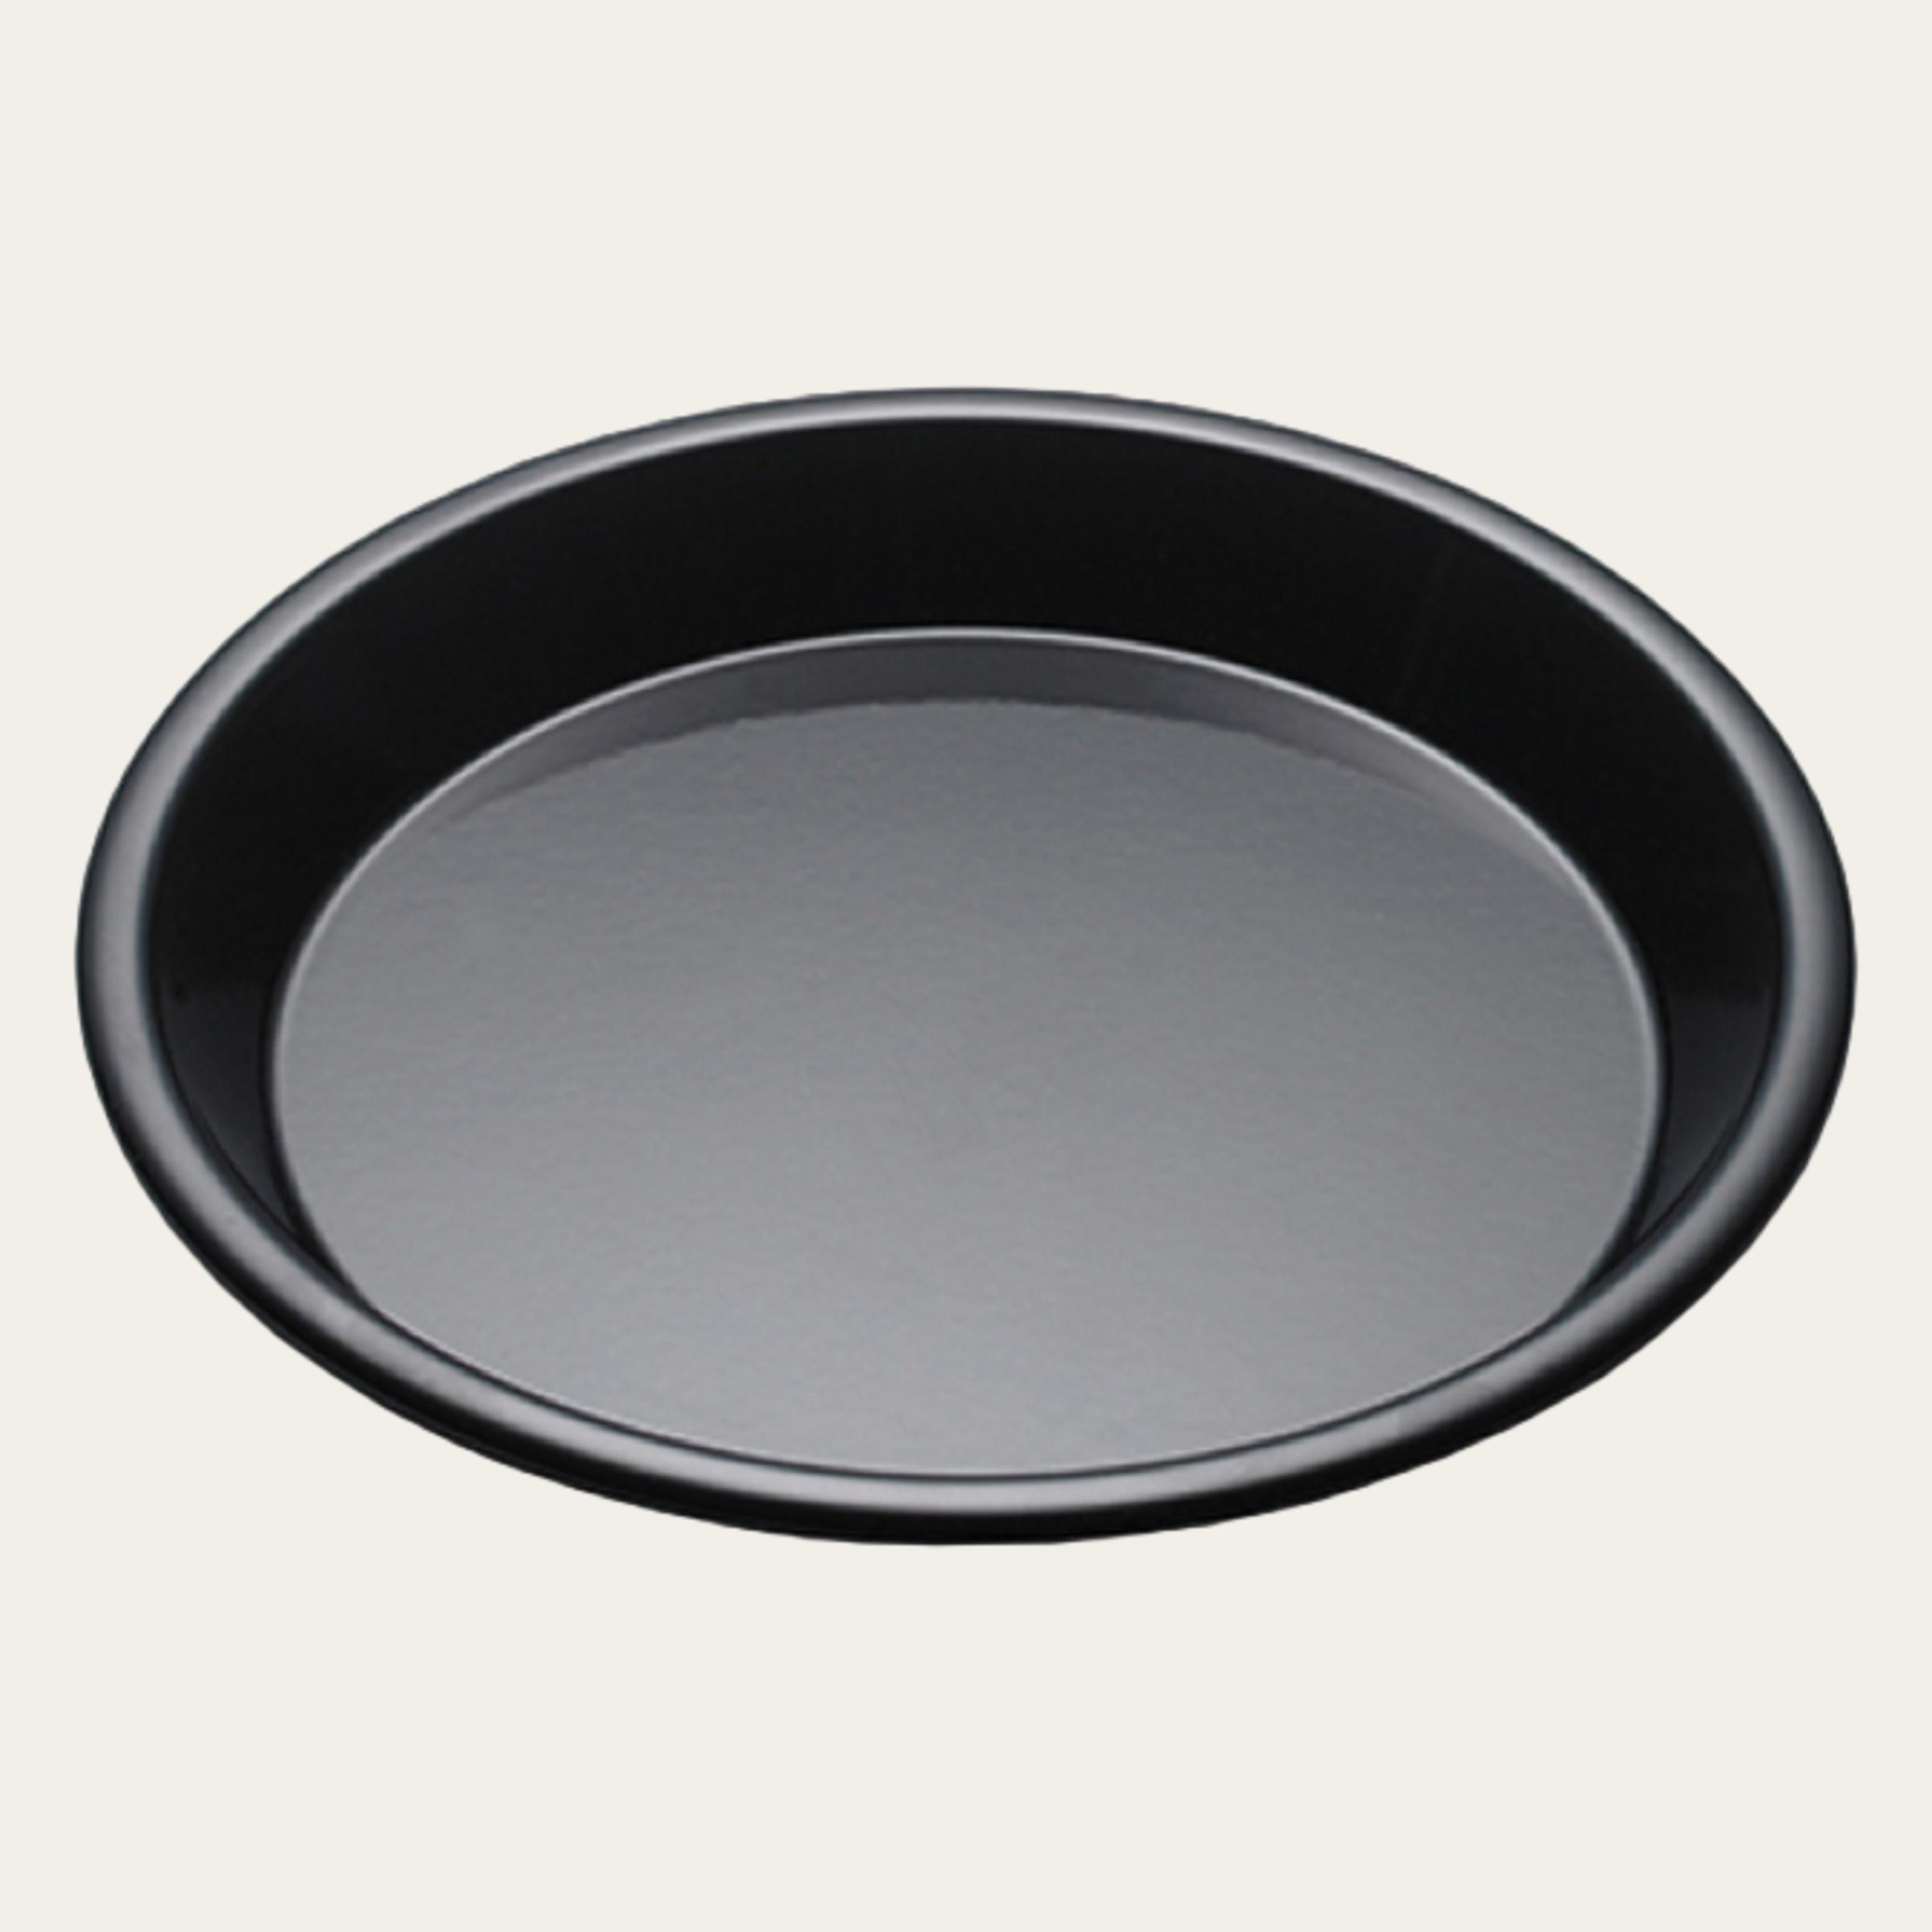 Round baking tray Ø 31 cm with TopClean